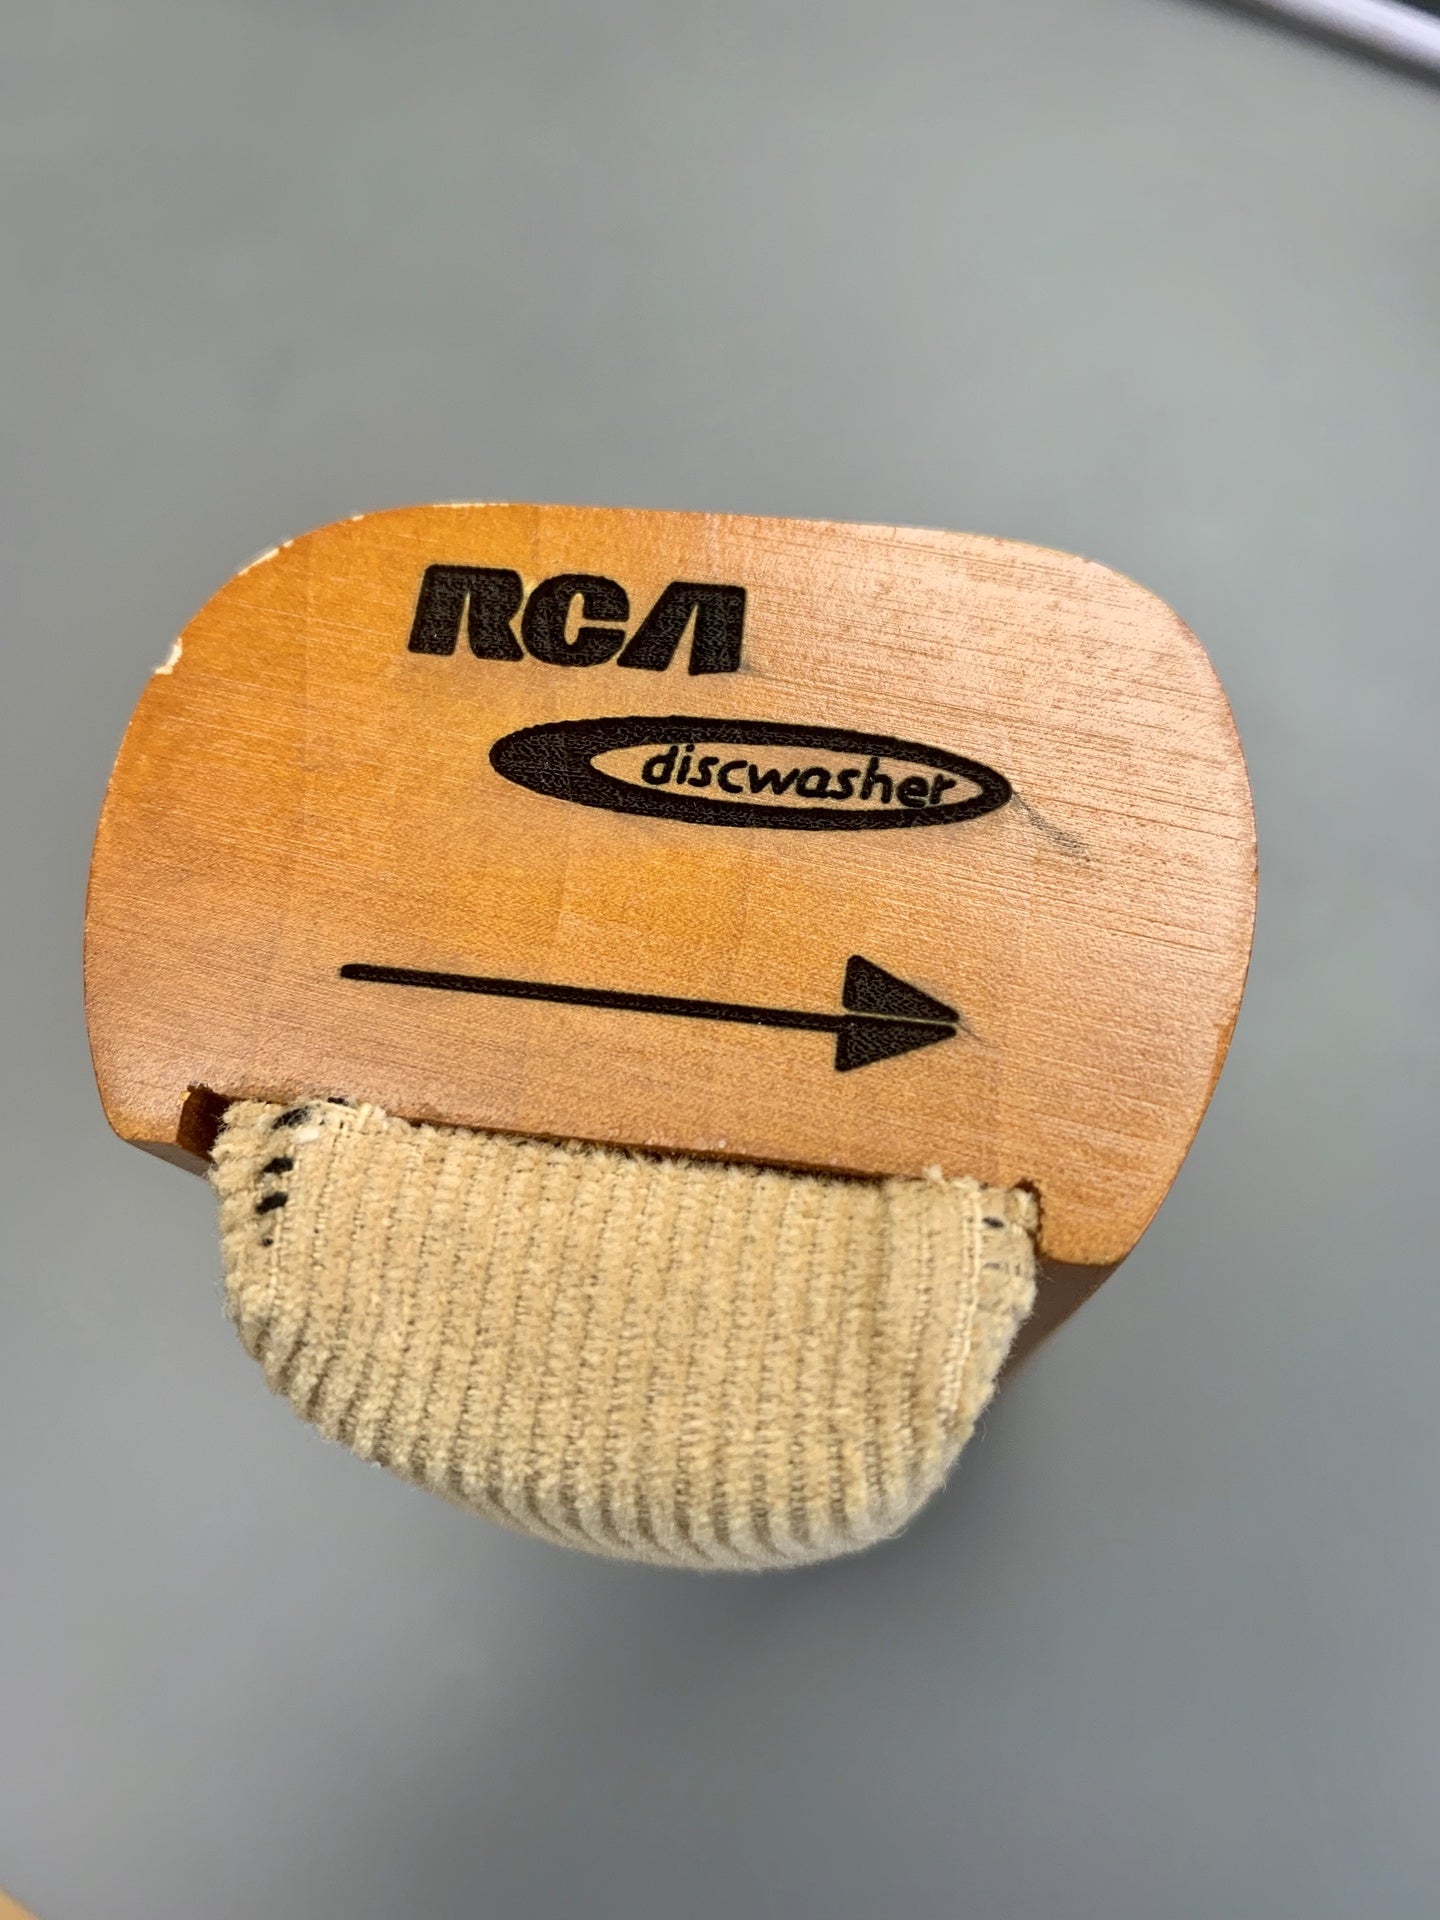 RCA Discwasher Record Cleaning Brush